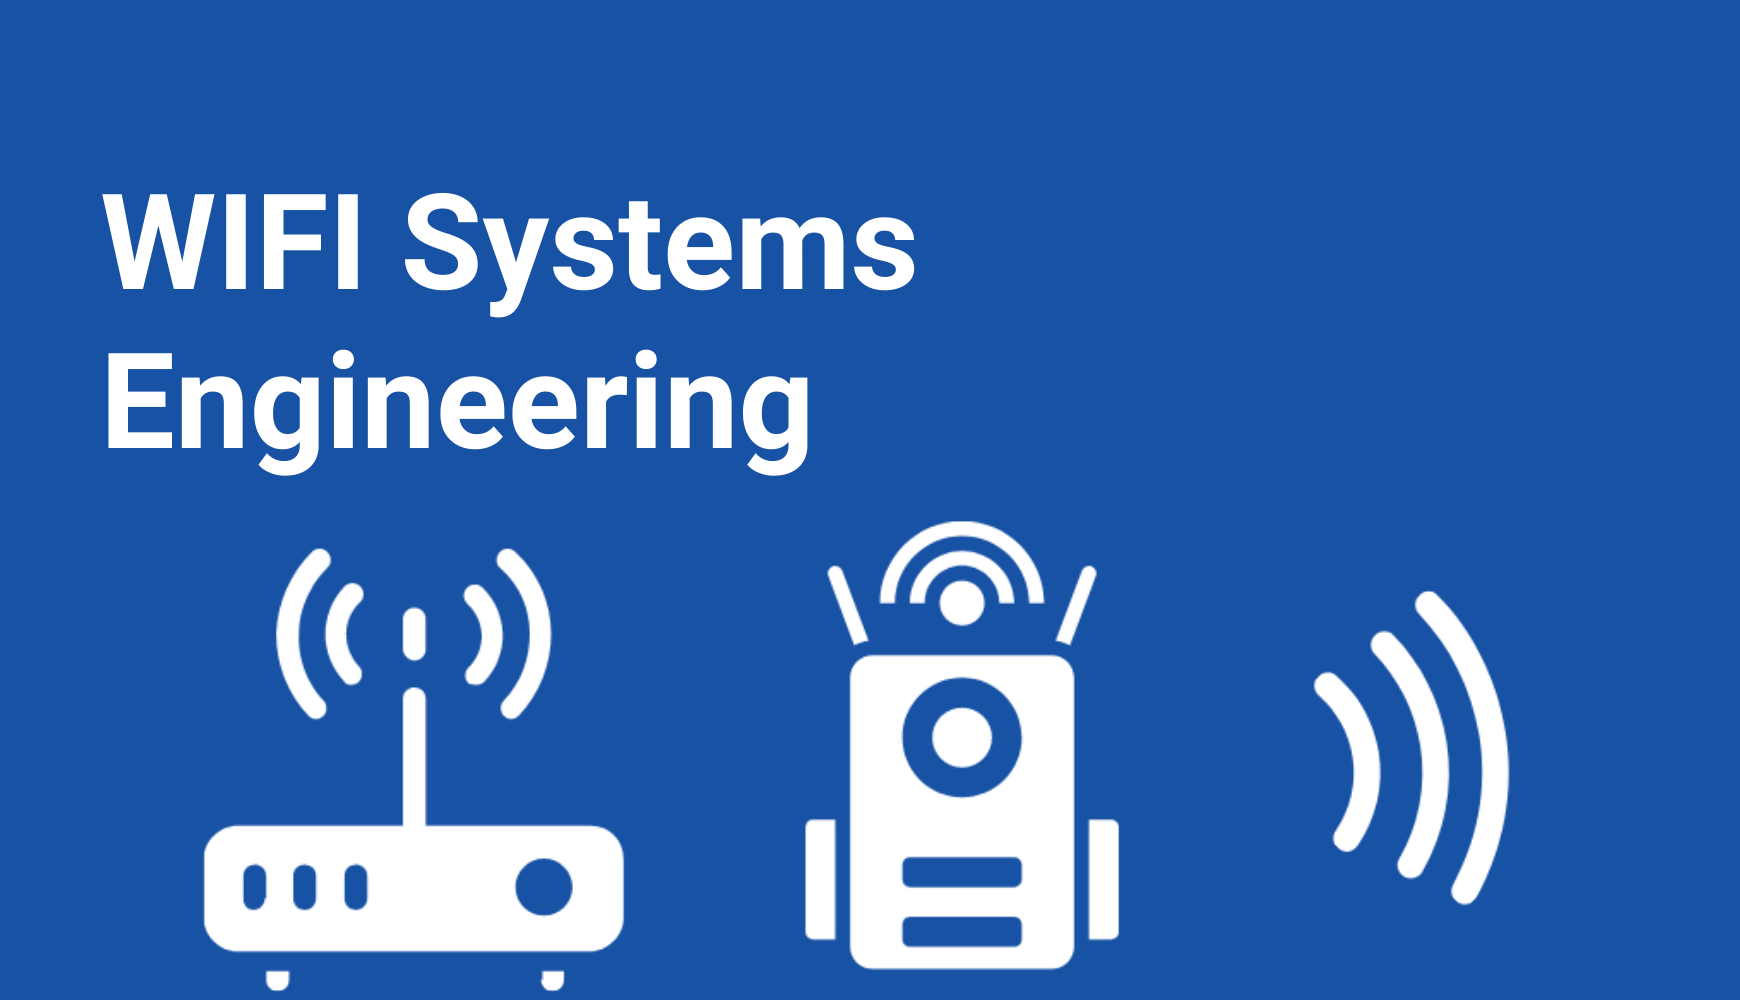 WiFi Systems Engineering